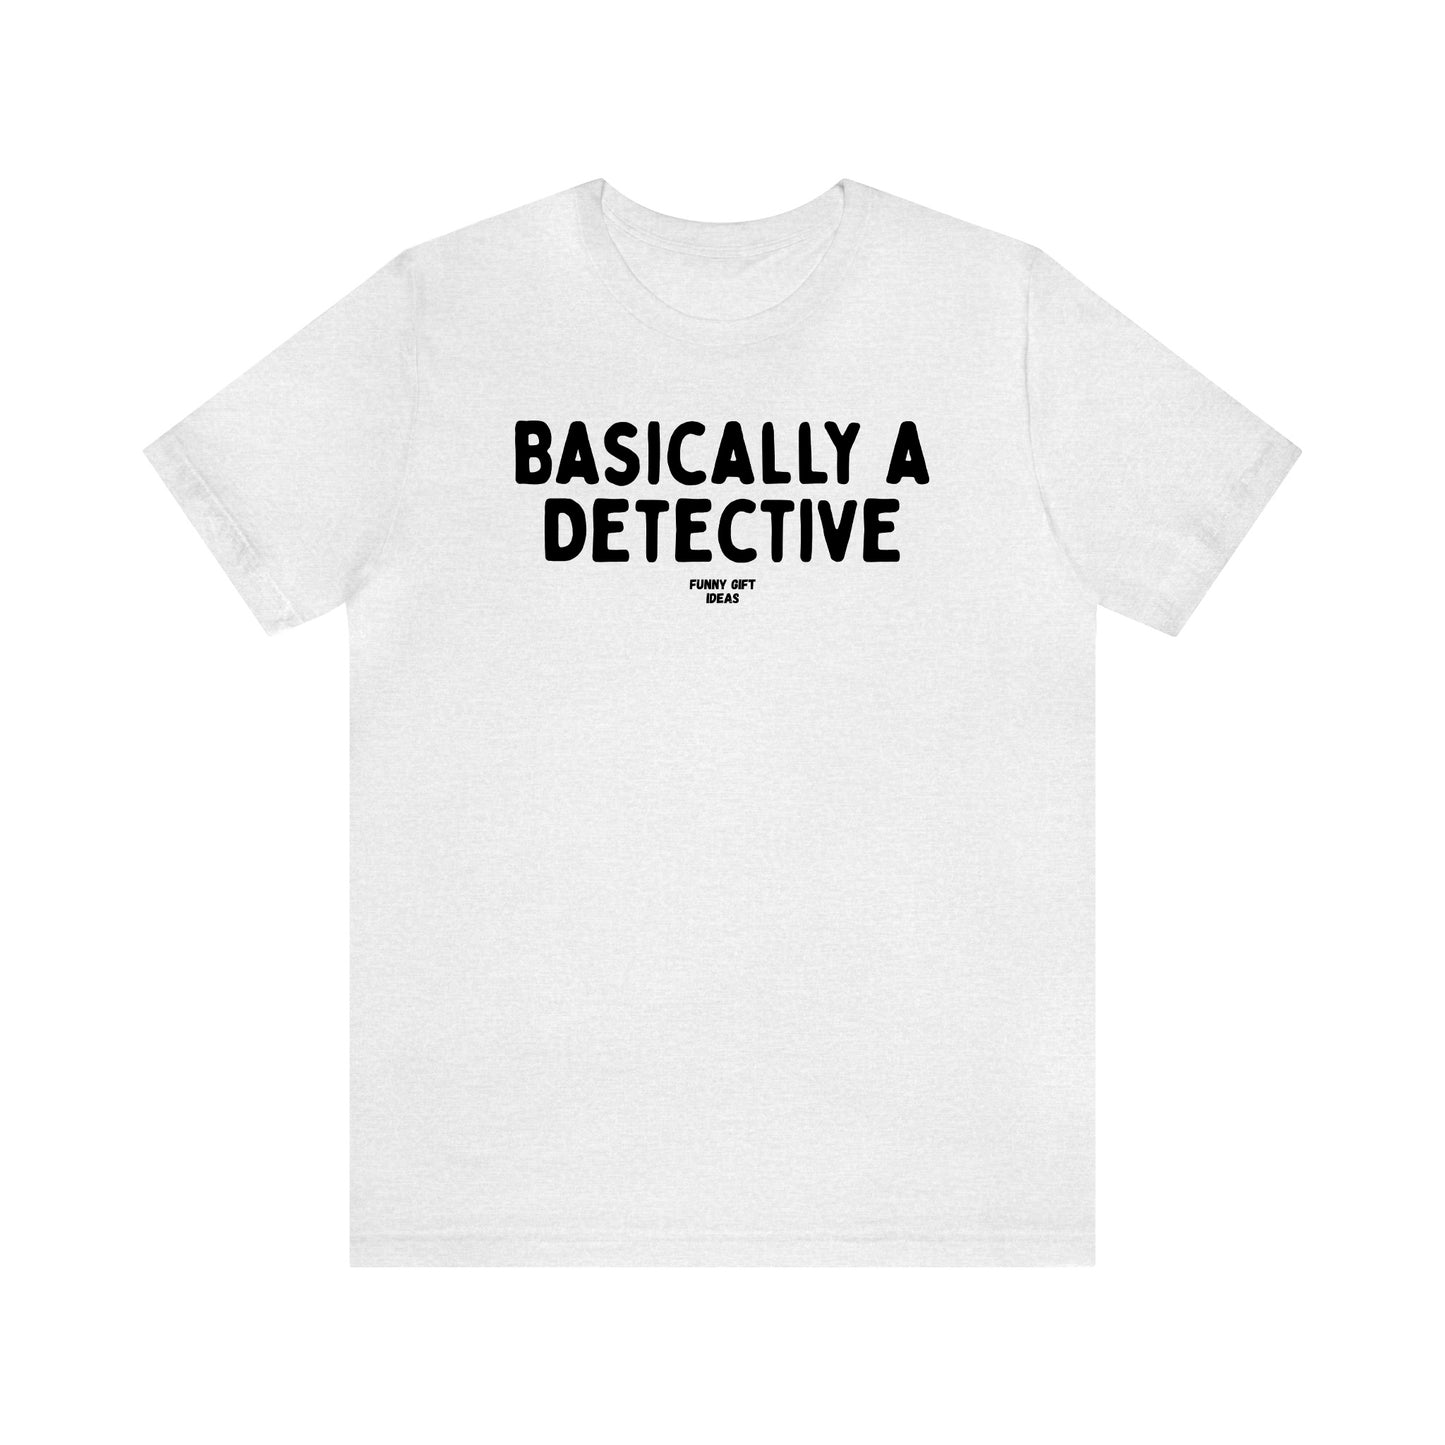 Funny Shirts for Women - Basically a Detective  - Women's T Shirts